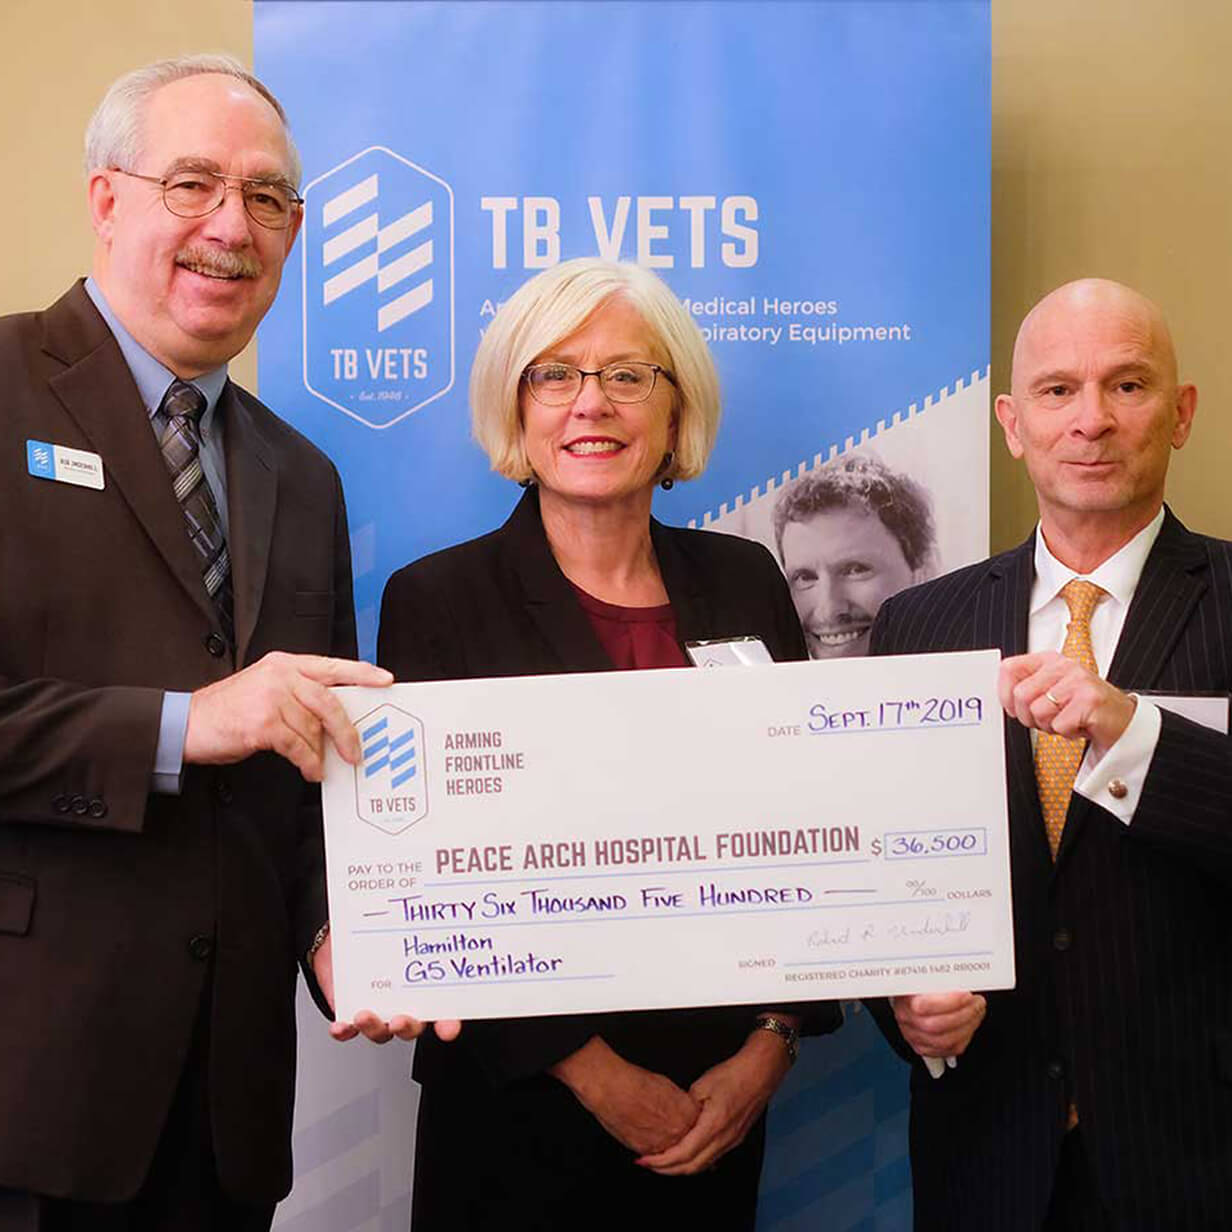 TB Vets Pledges $73,000 to Peace Arch Hospital Foundation